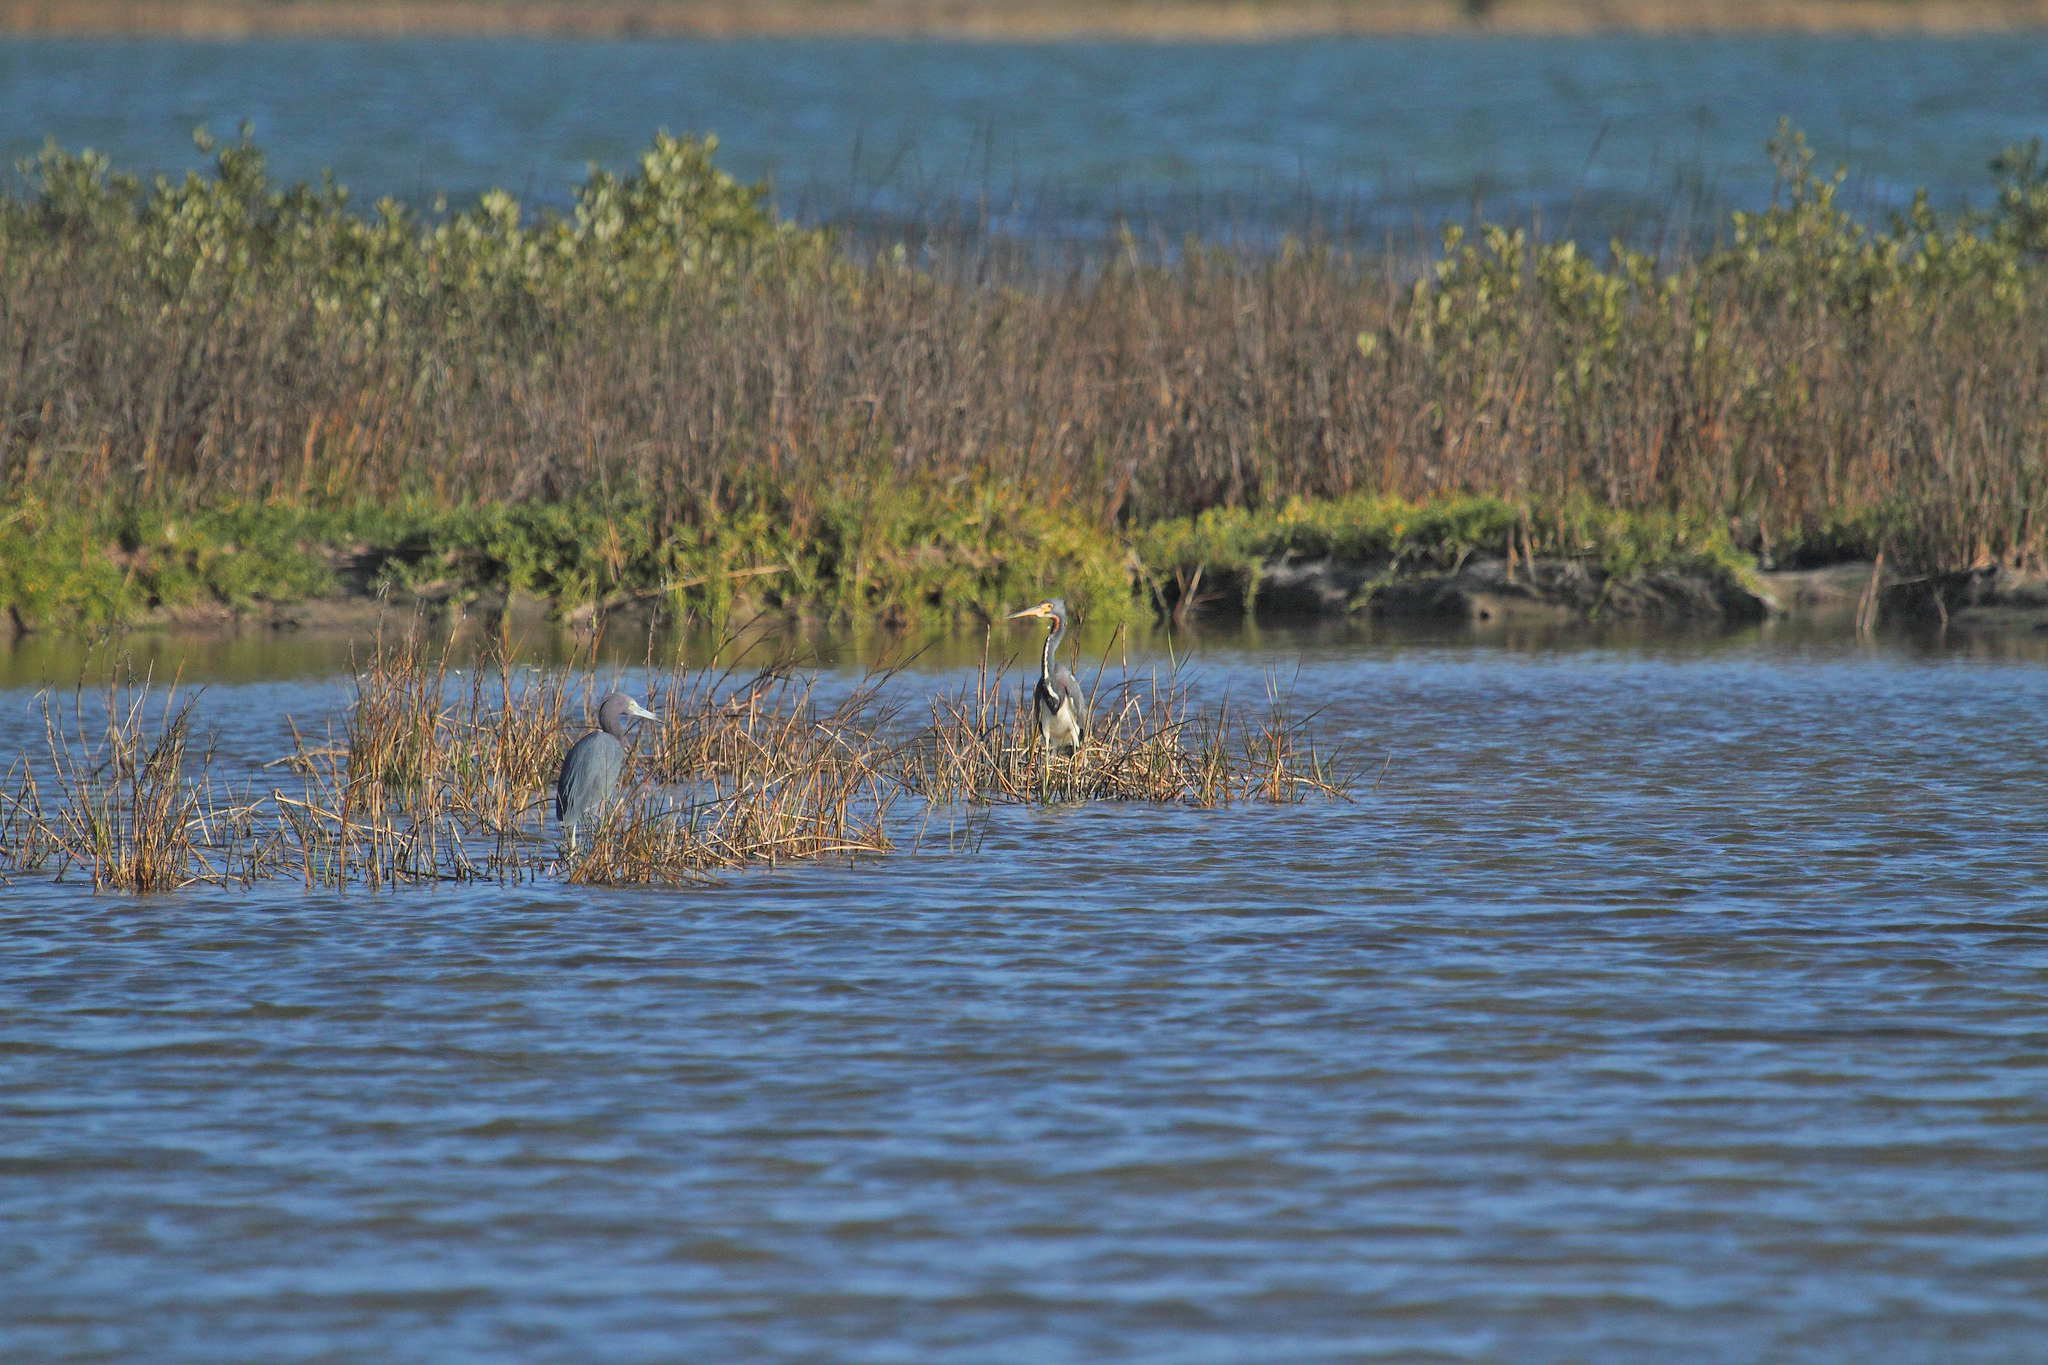 Two birds sit in brown marsh grass just off shore.